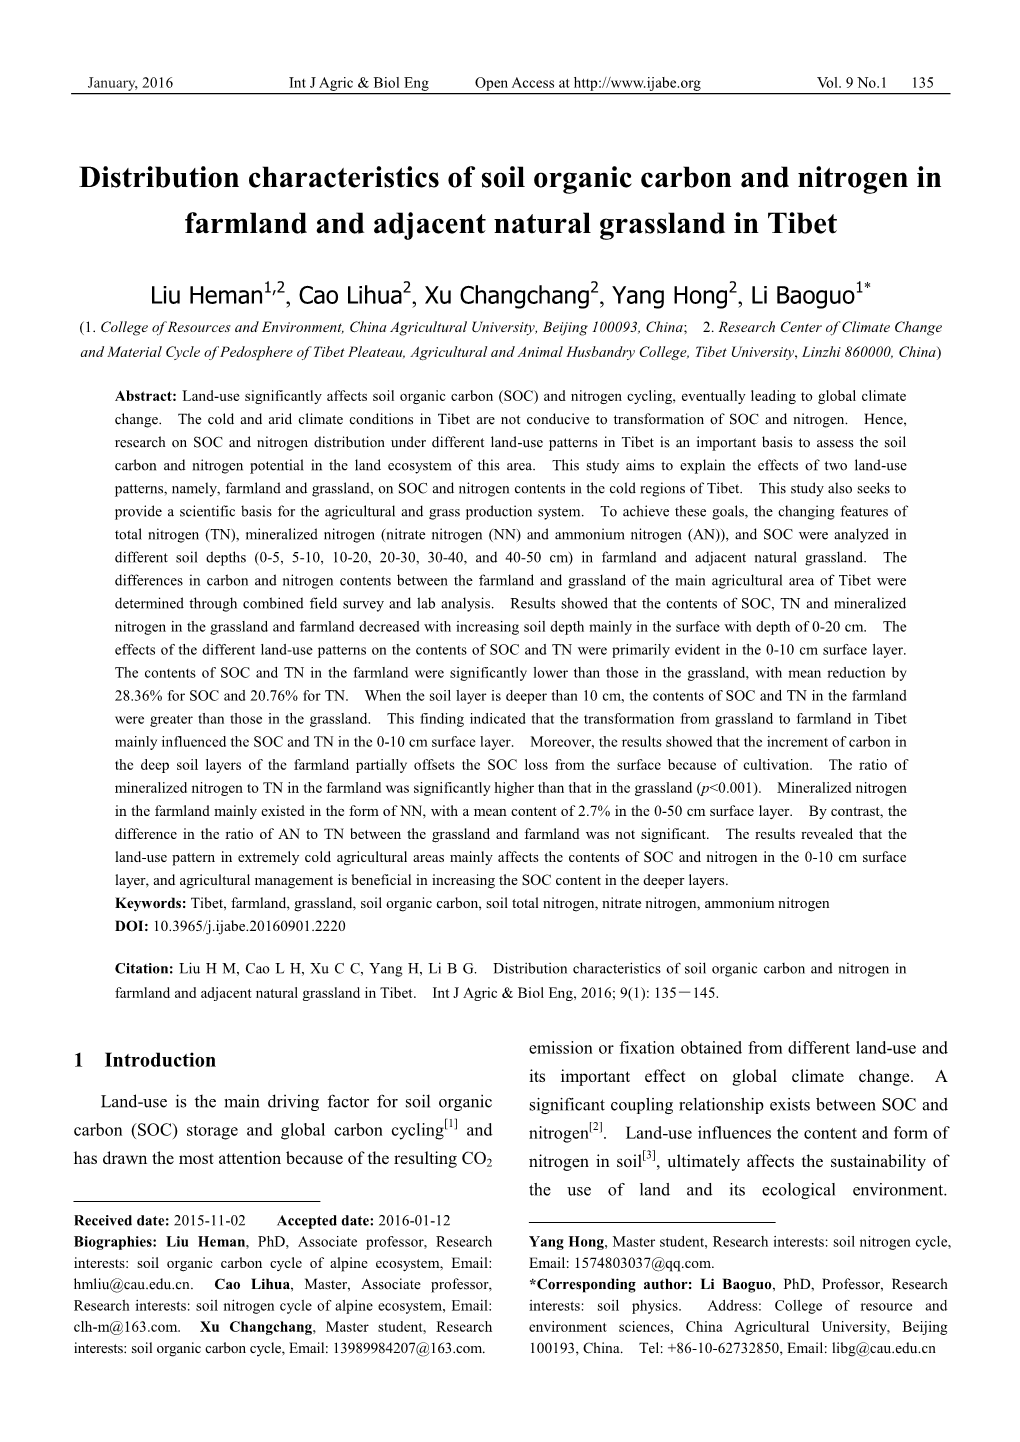 Distribution Characteristics of Soil Organic Carbon and Nitrogen in Farmland and Adjacent Natural Grassland in Tibet